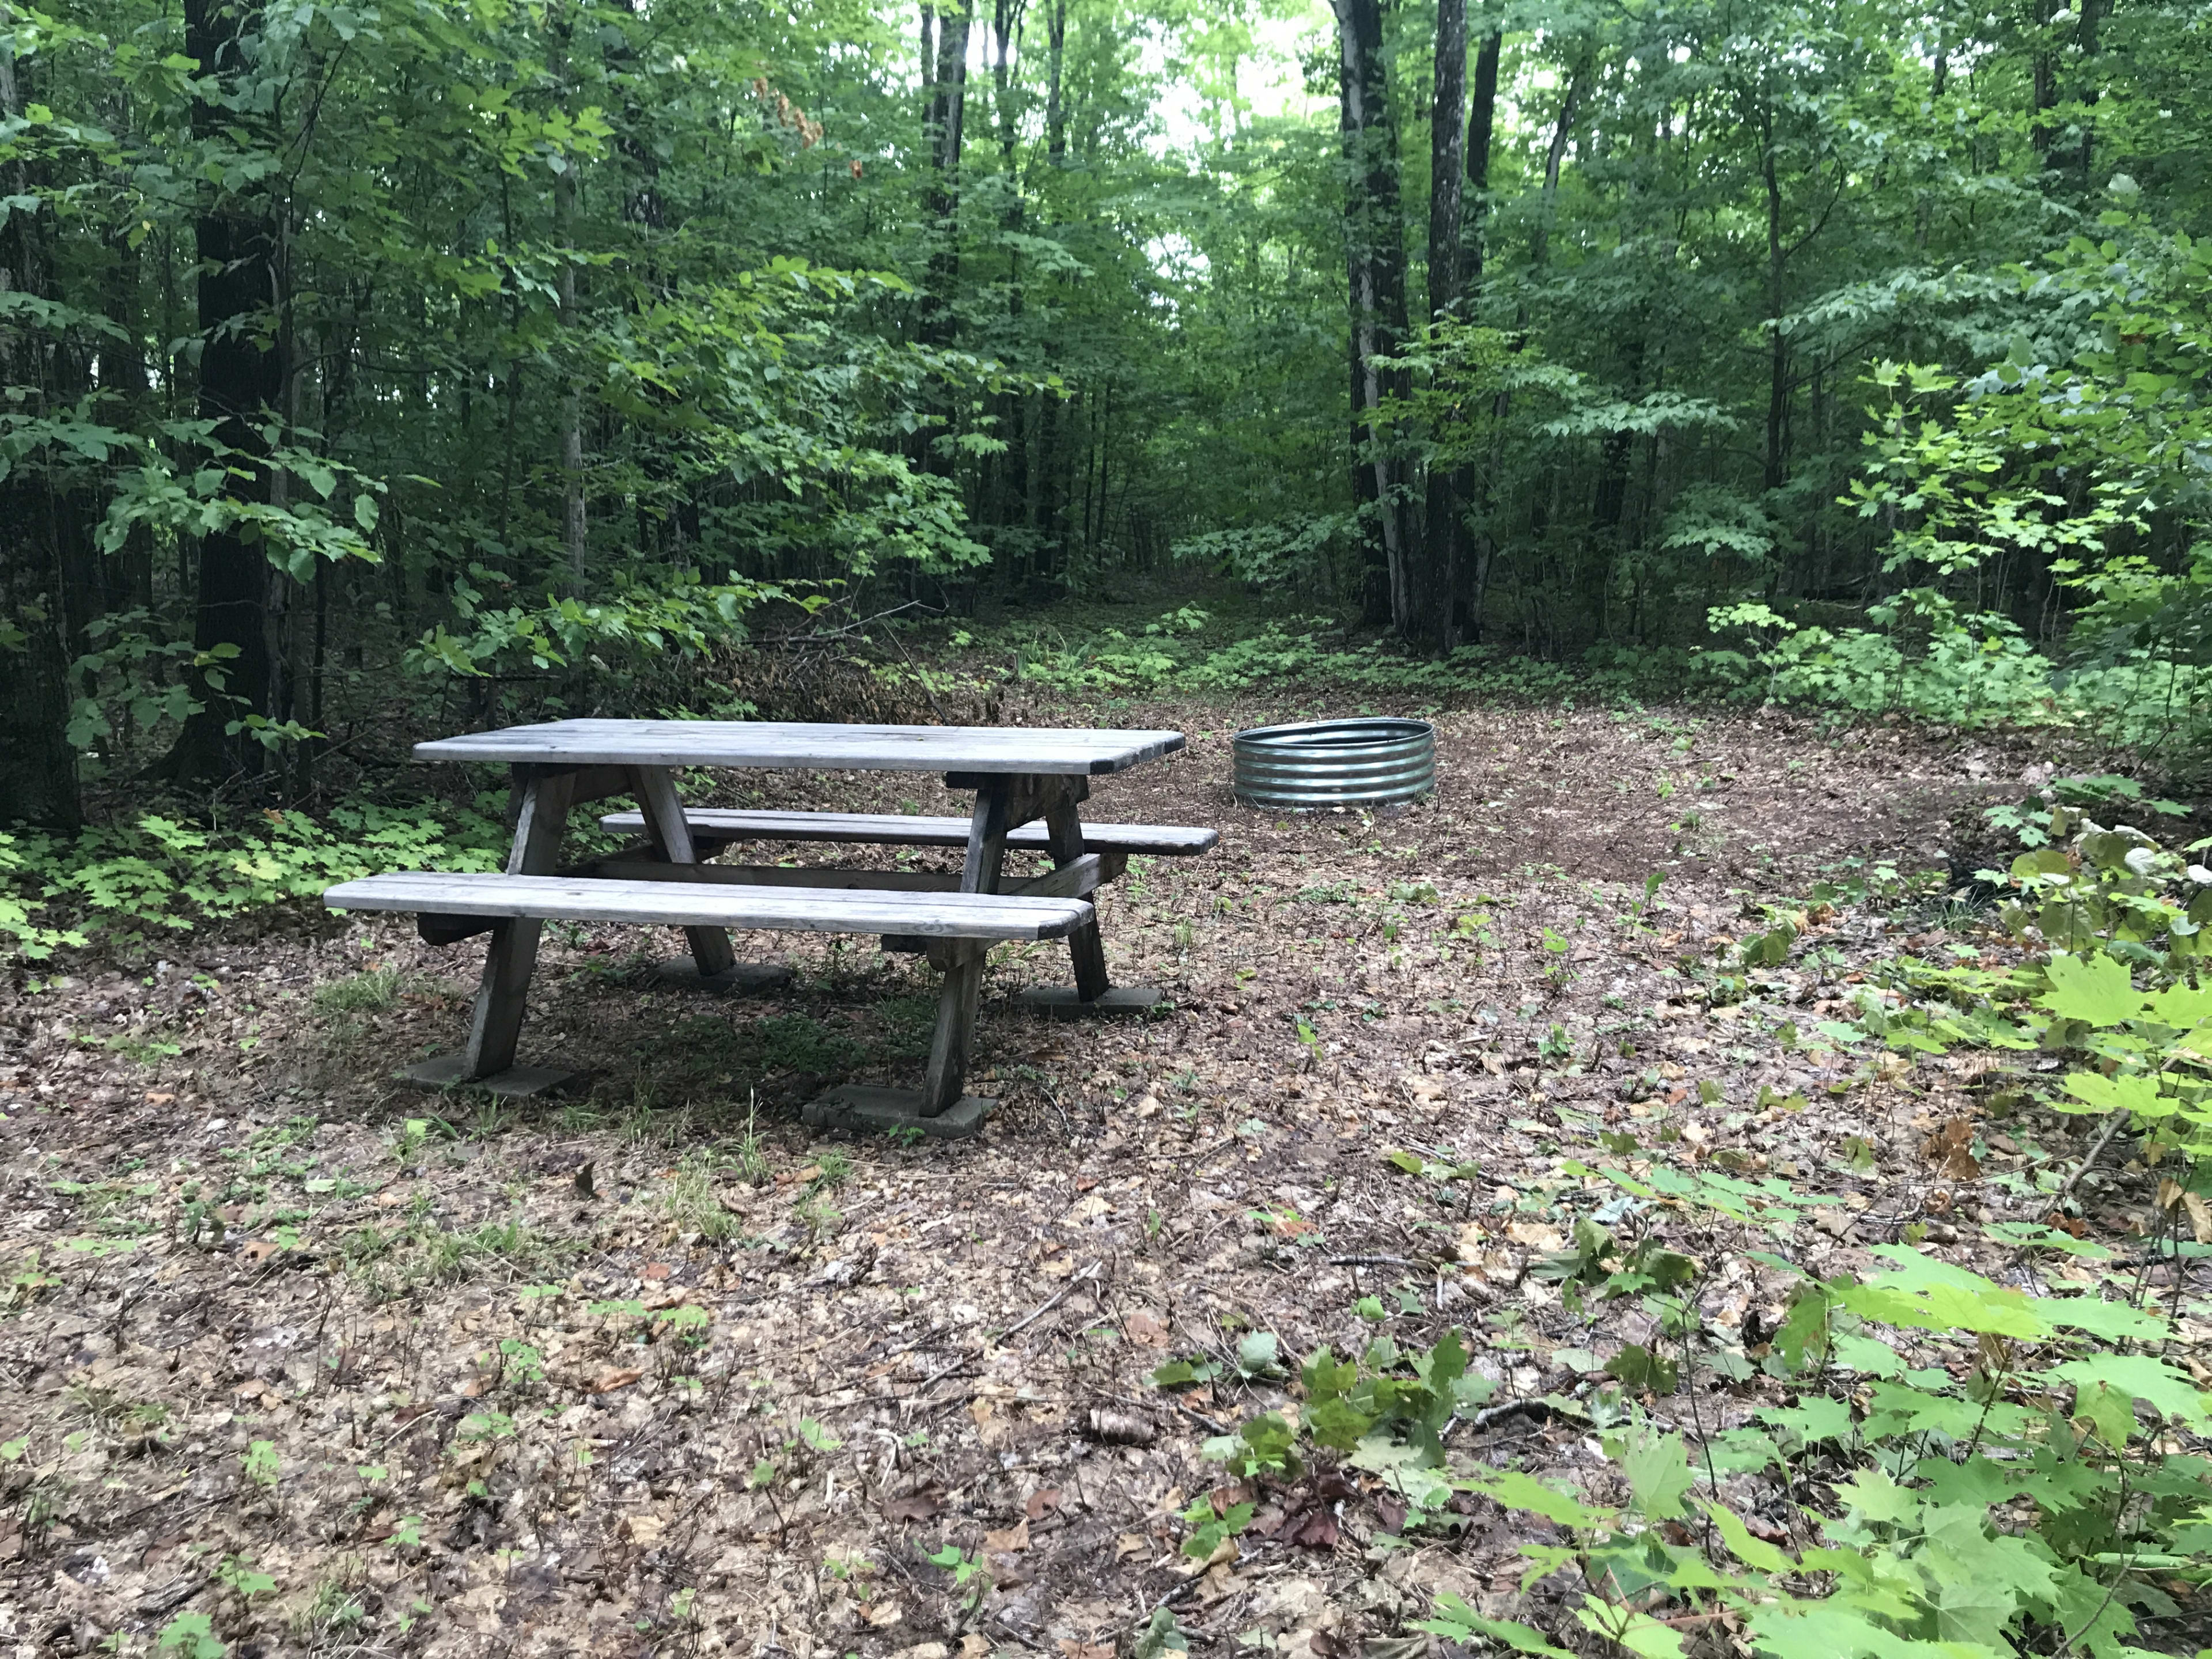 The First Site has a Picnic Table!